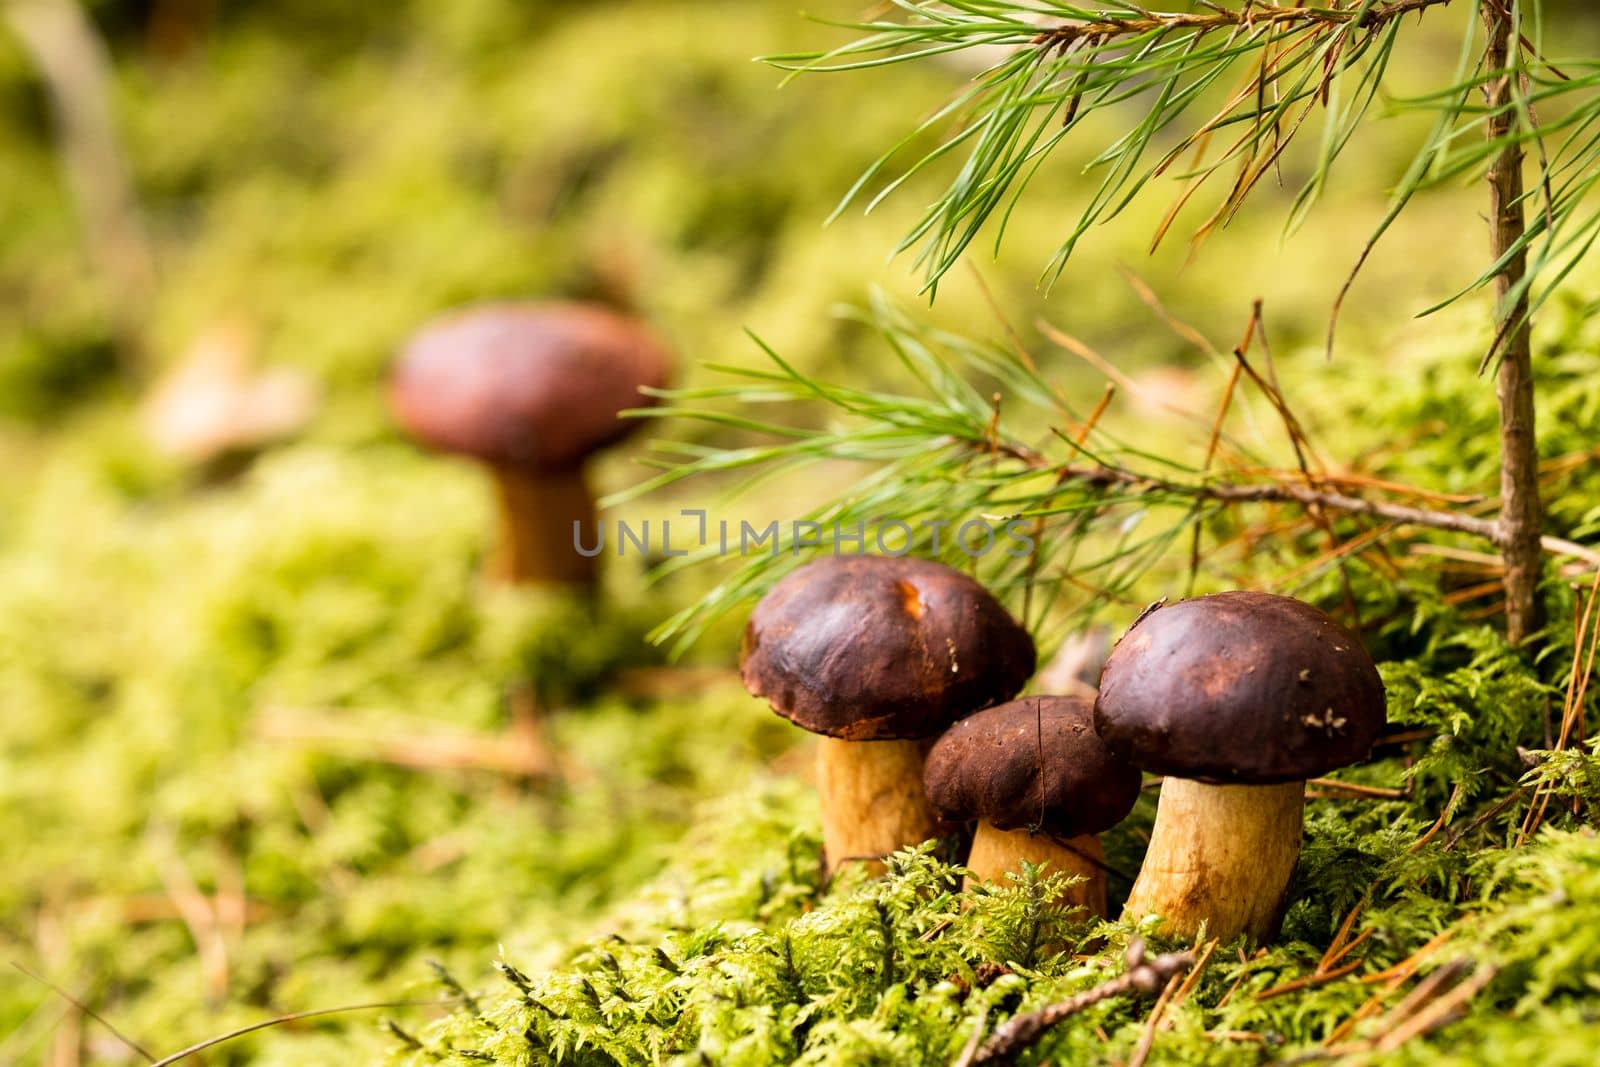 There are a lot of mushrooms lying in the forest on green moss. A lot of Polish moss mushrooms.